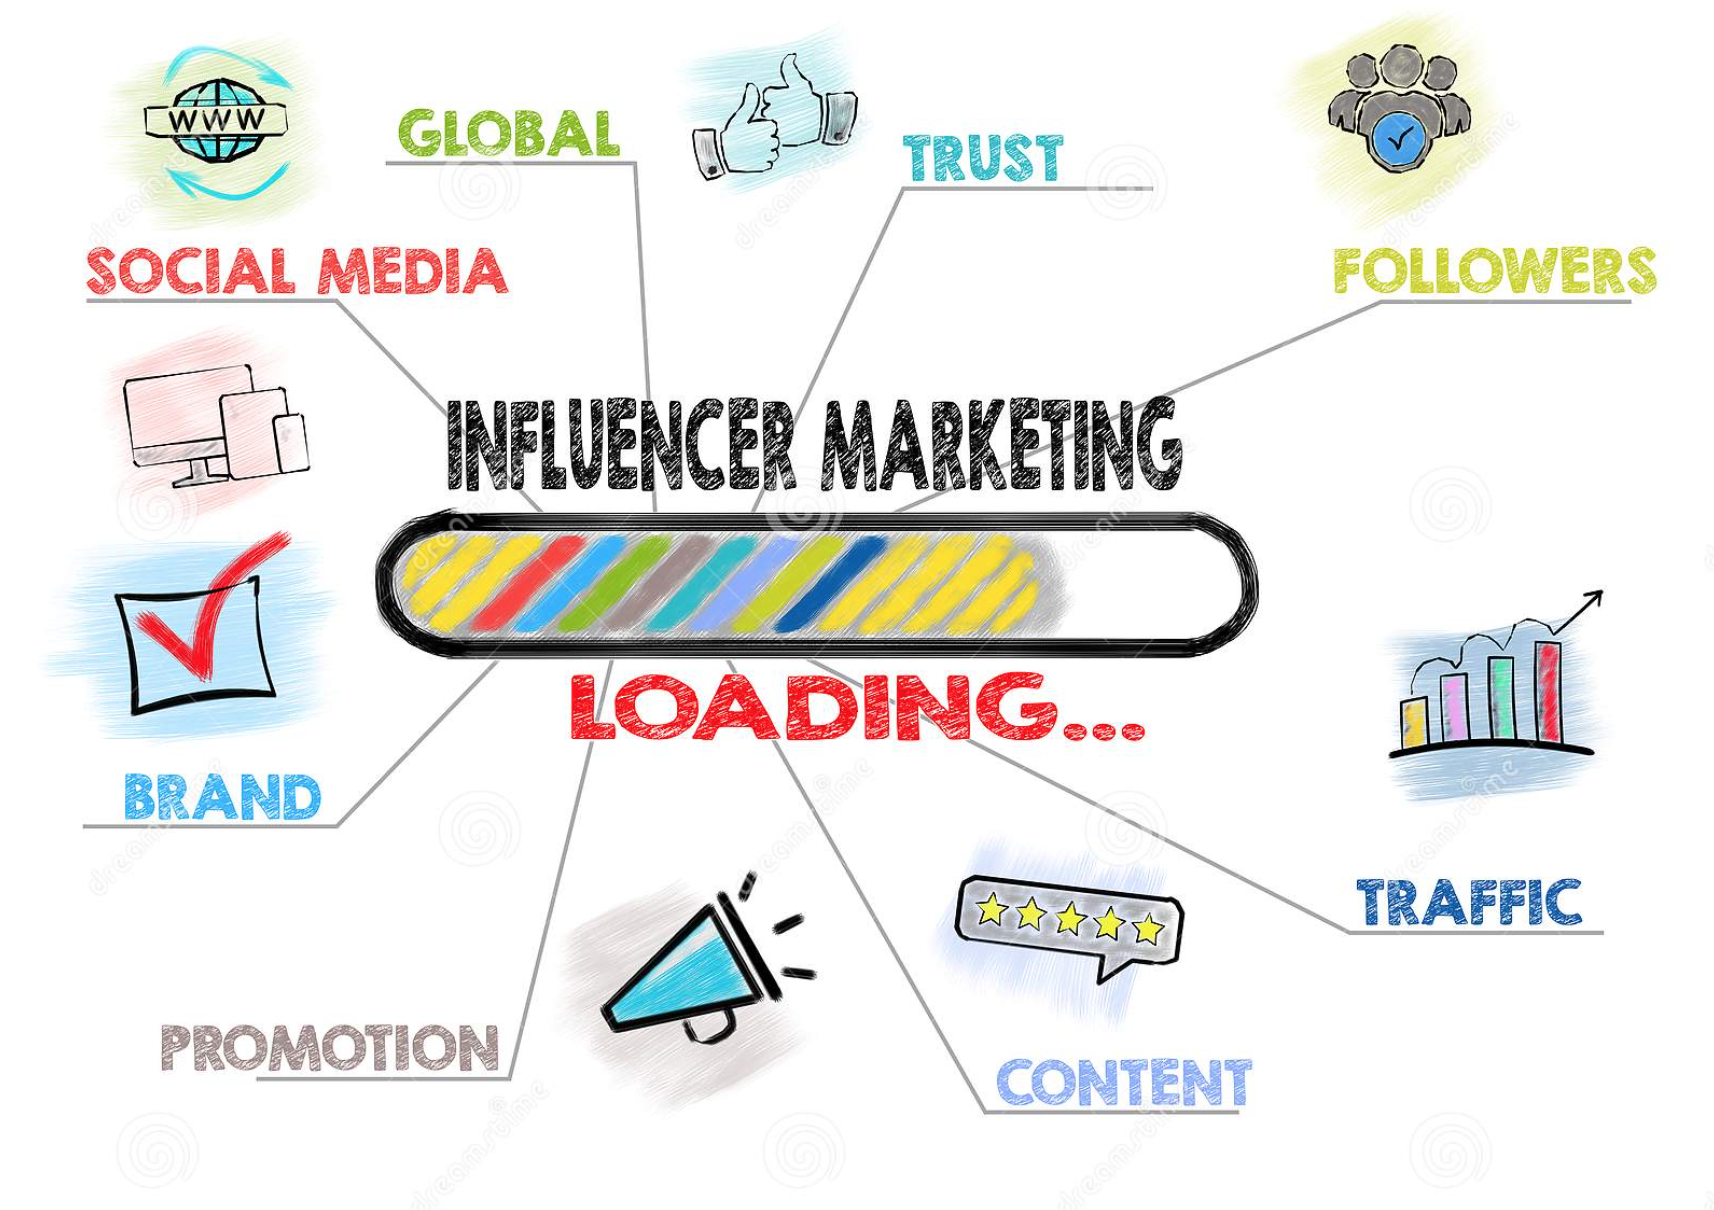 A Basic Guide to Influencer Marketing